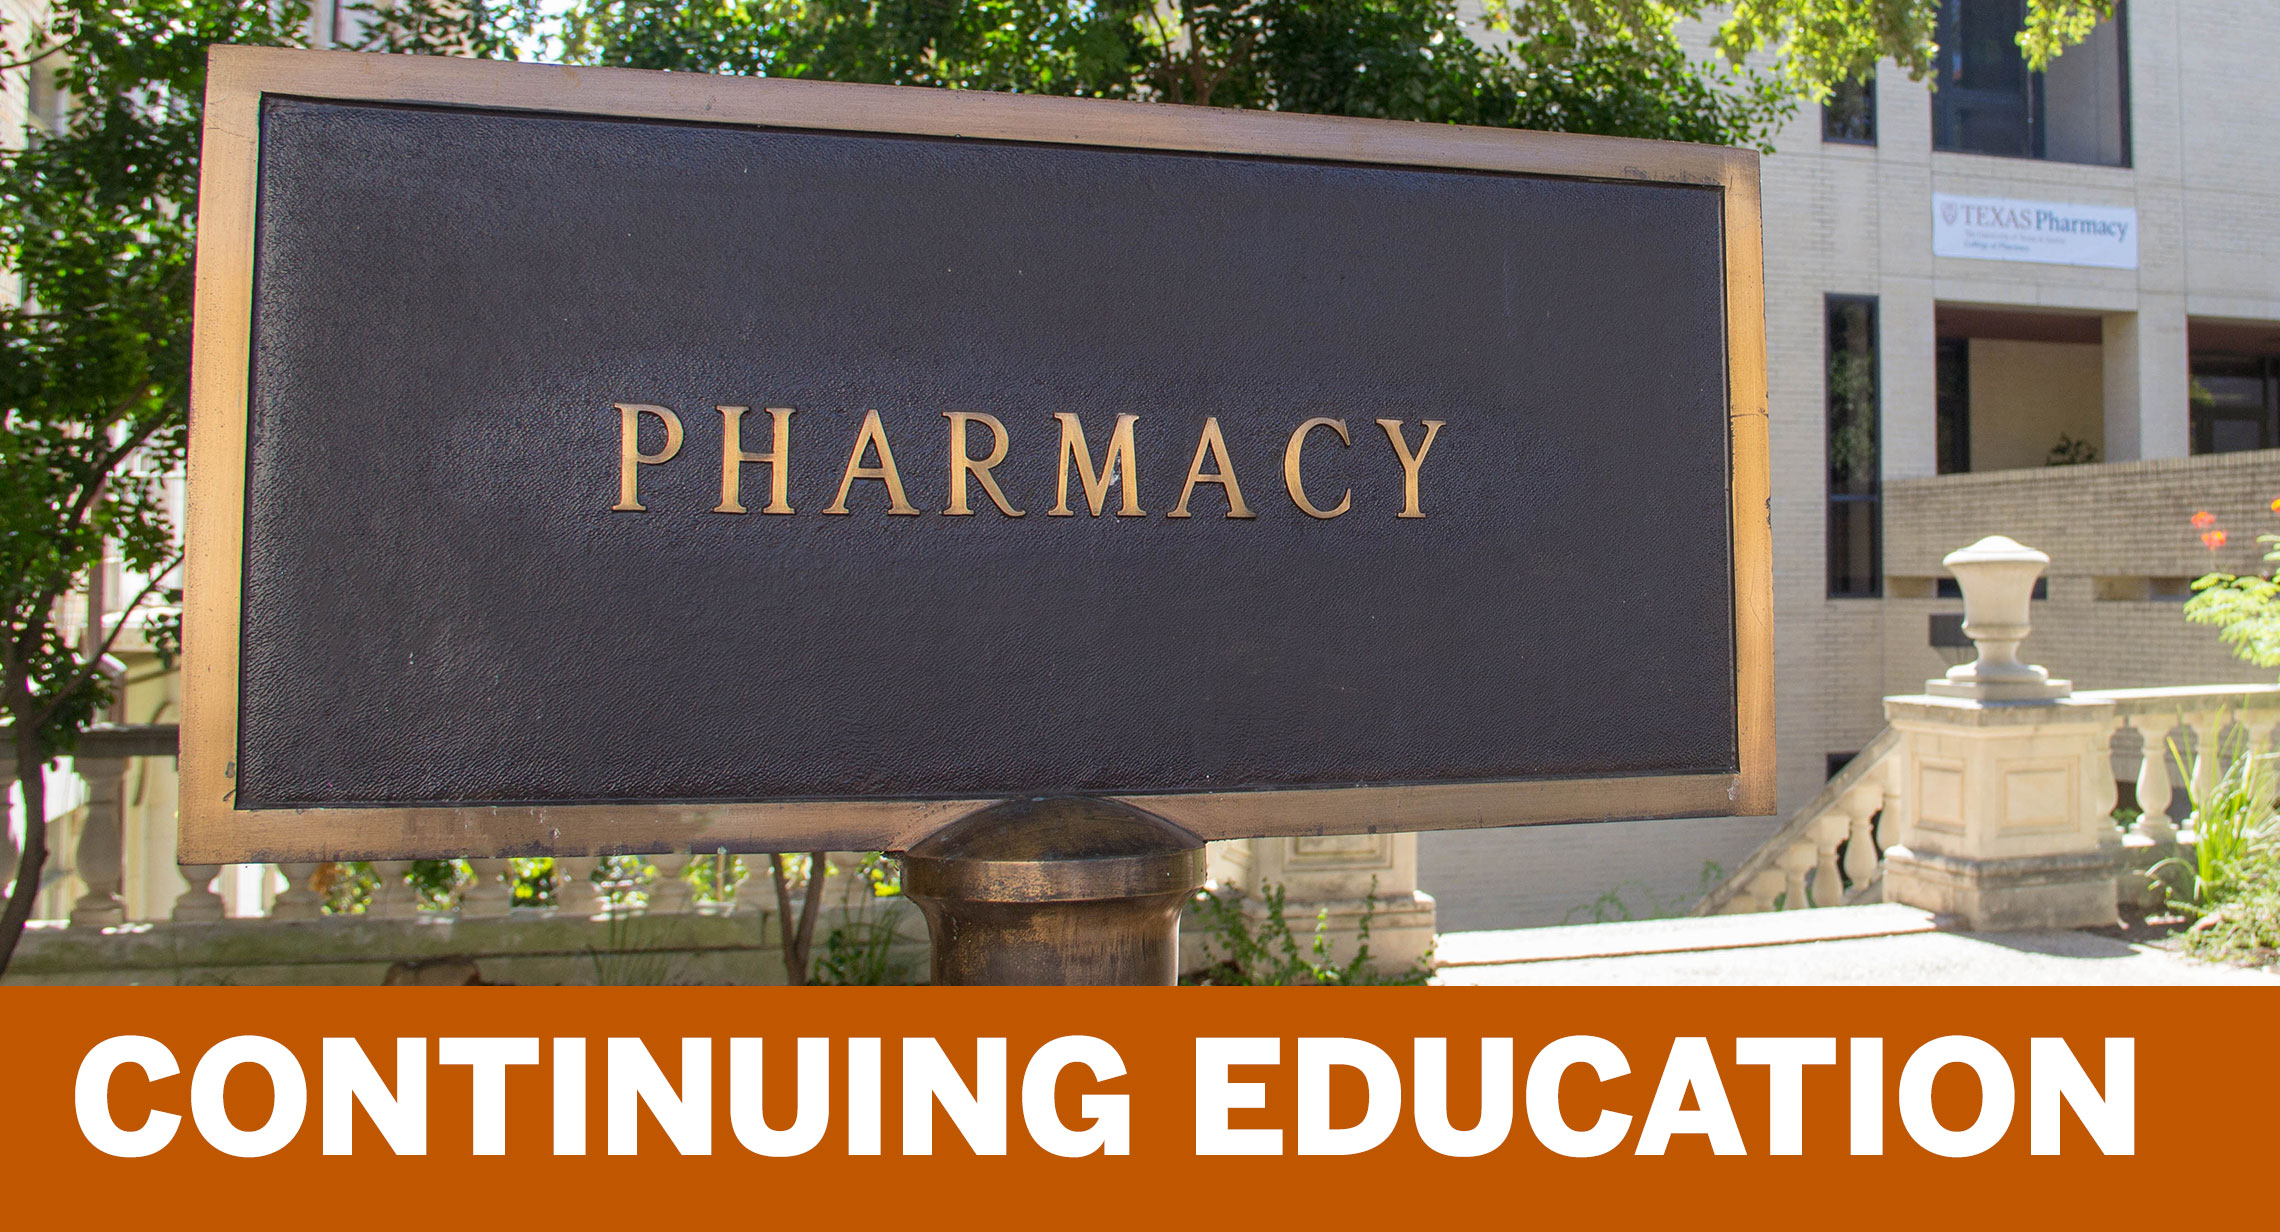 Continuing Education - photo of pharmacy building sign